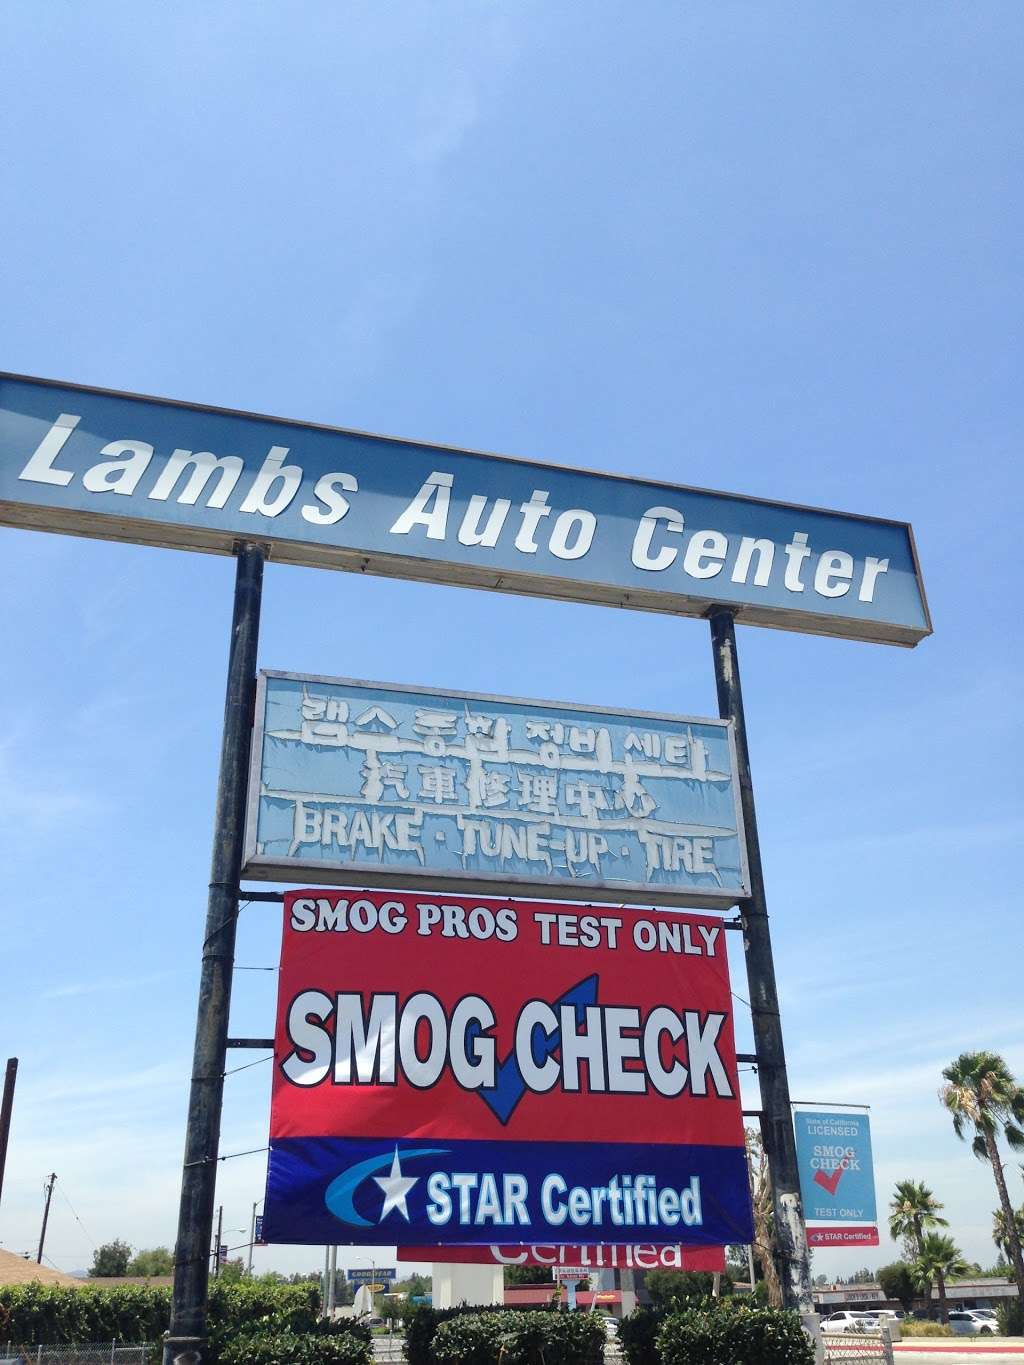 smog pros test only | 18934 Colima Rd a, Rowland Heights, CA 91748 | Phone: (626) 839-6000